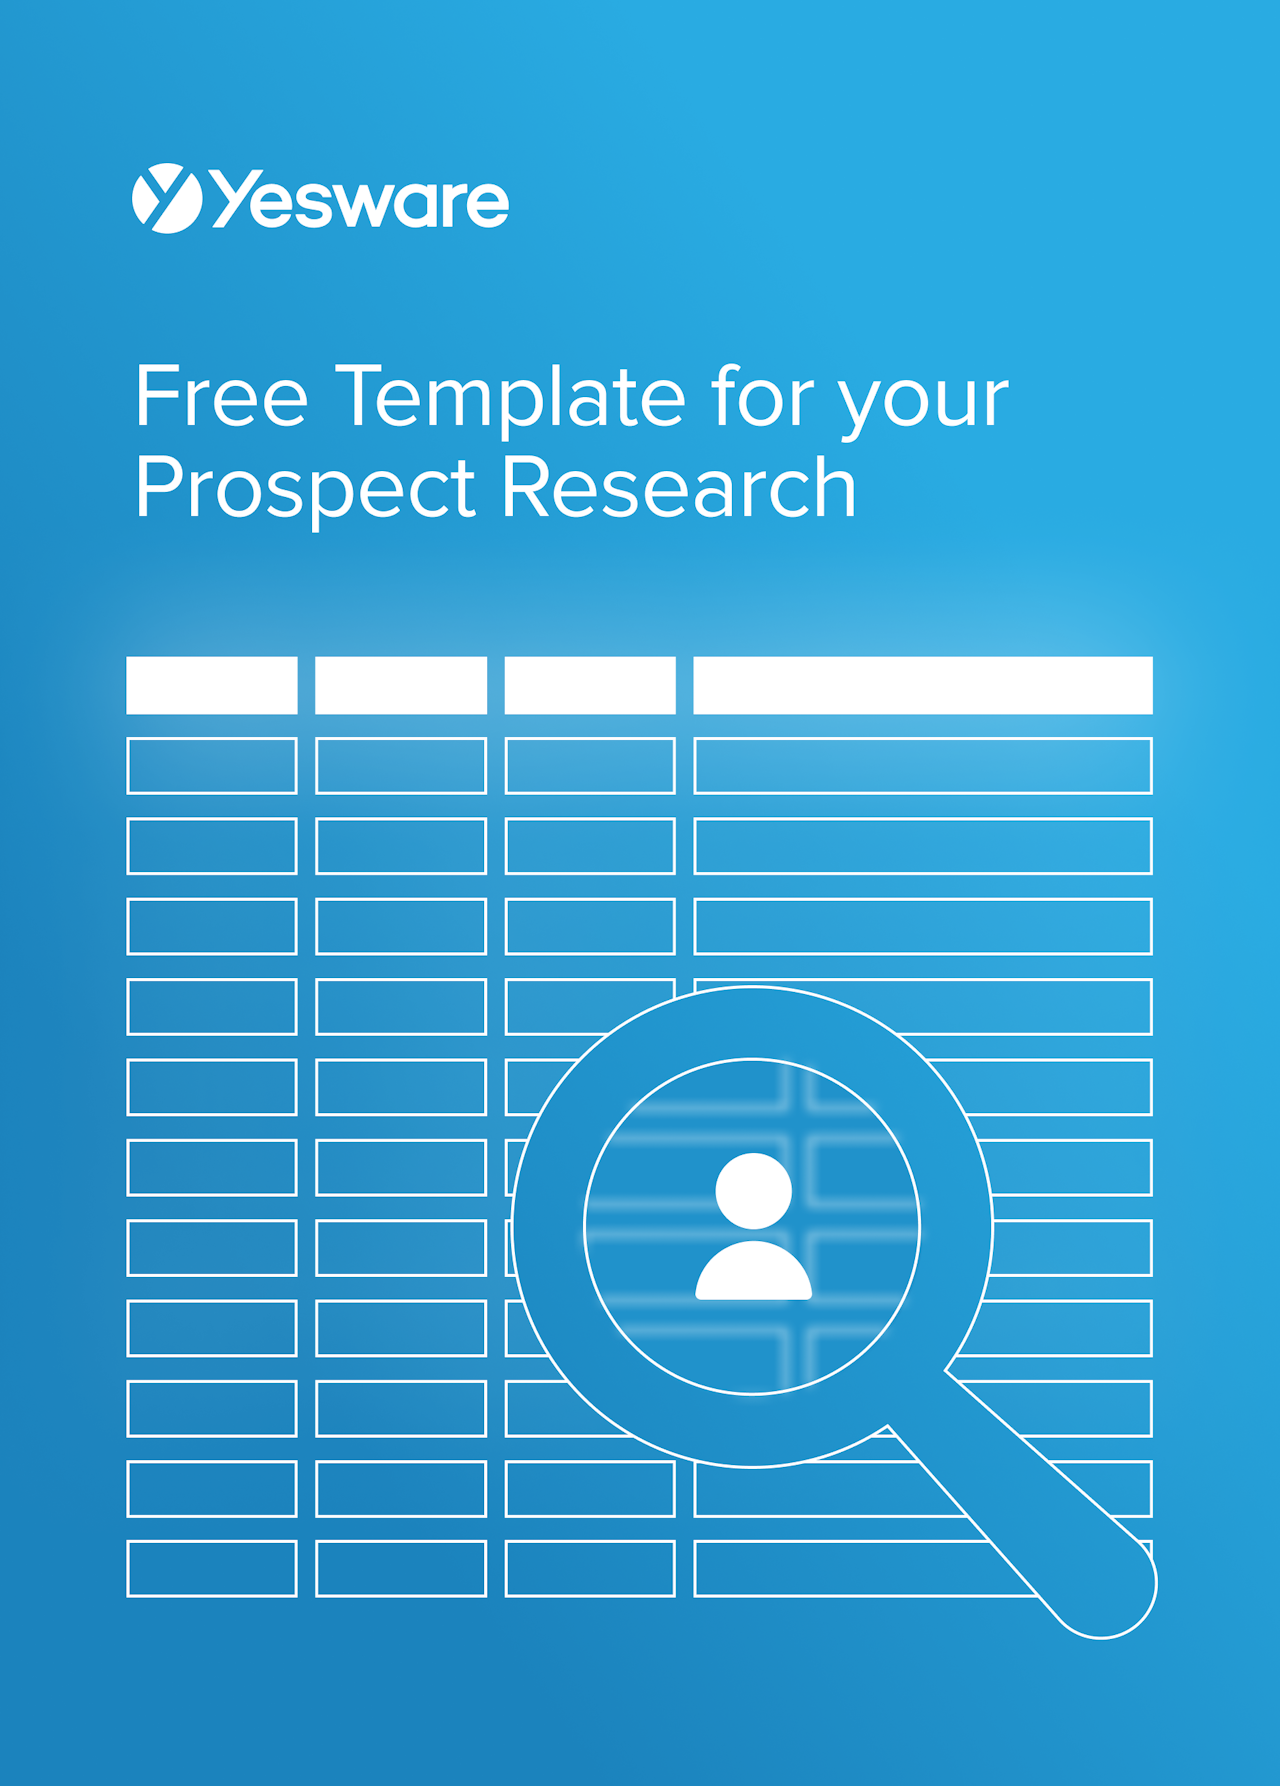 Free Template for Your Prospect Research